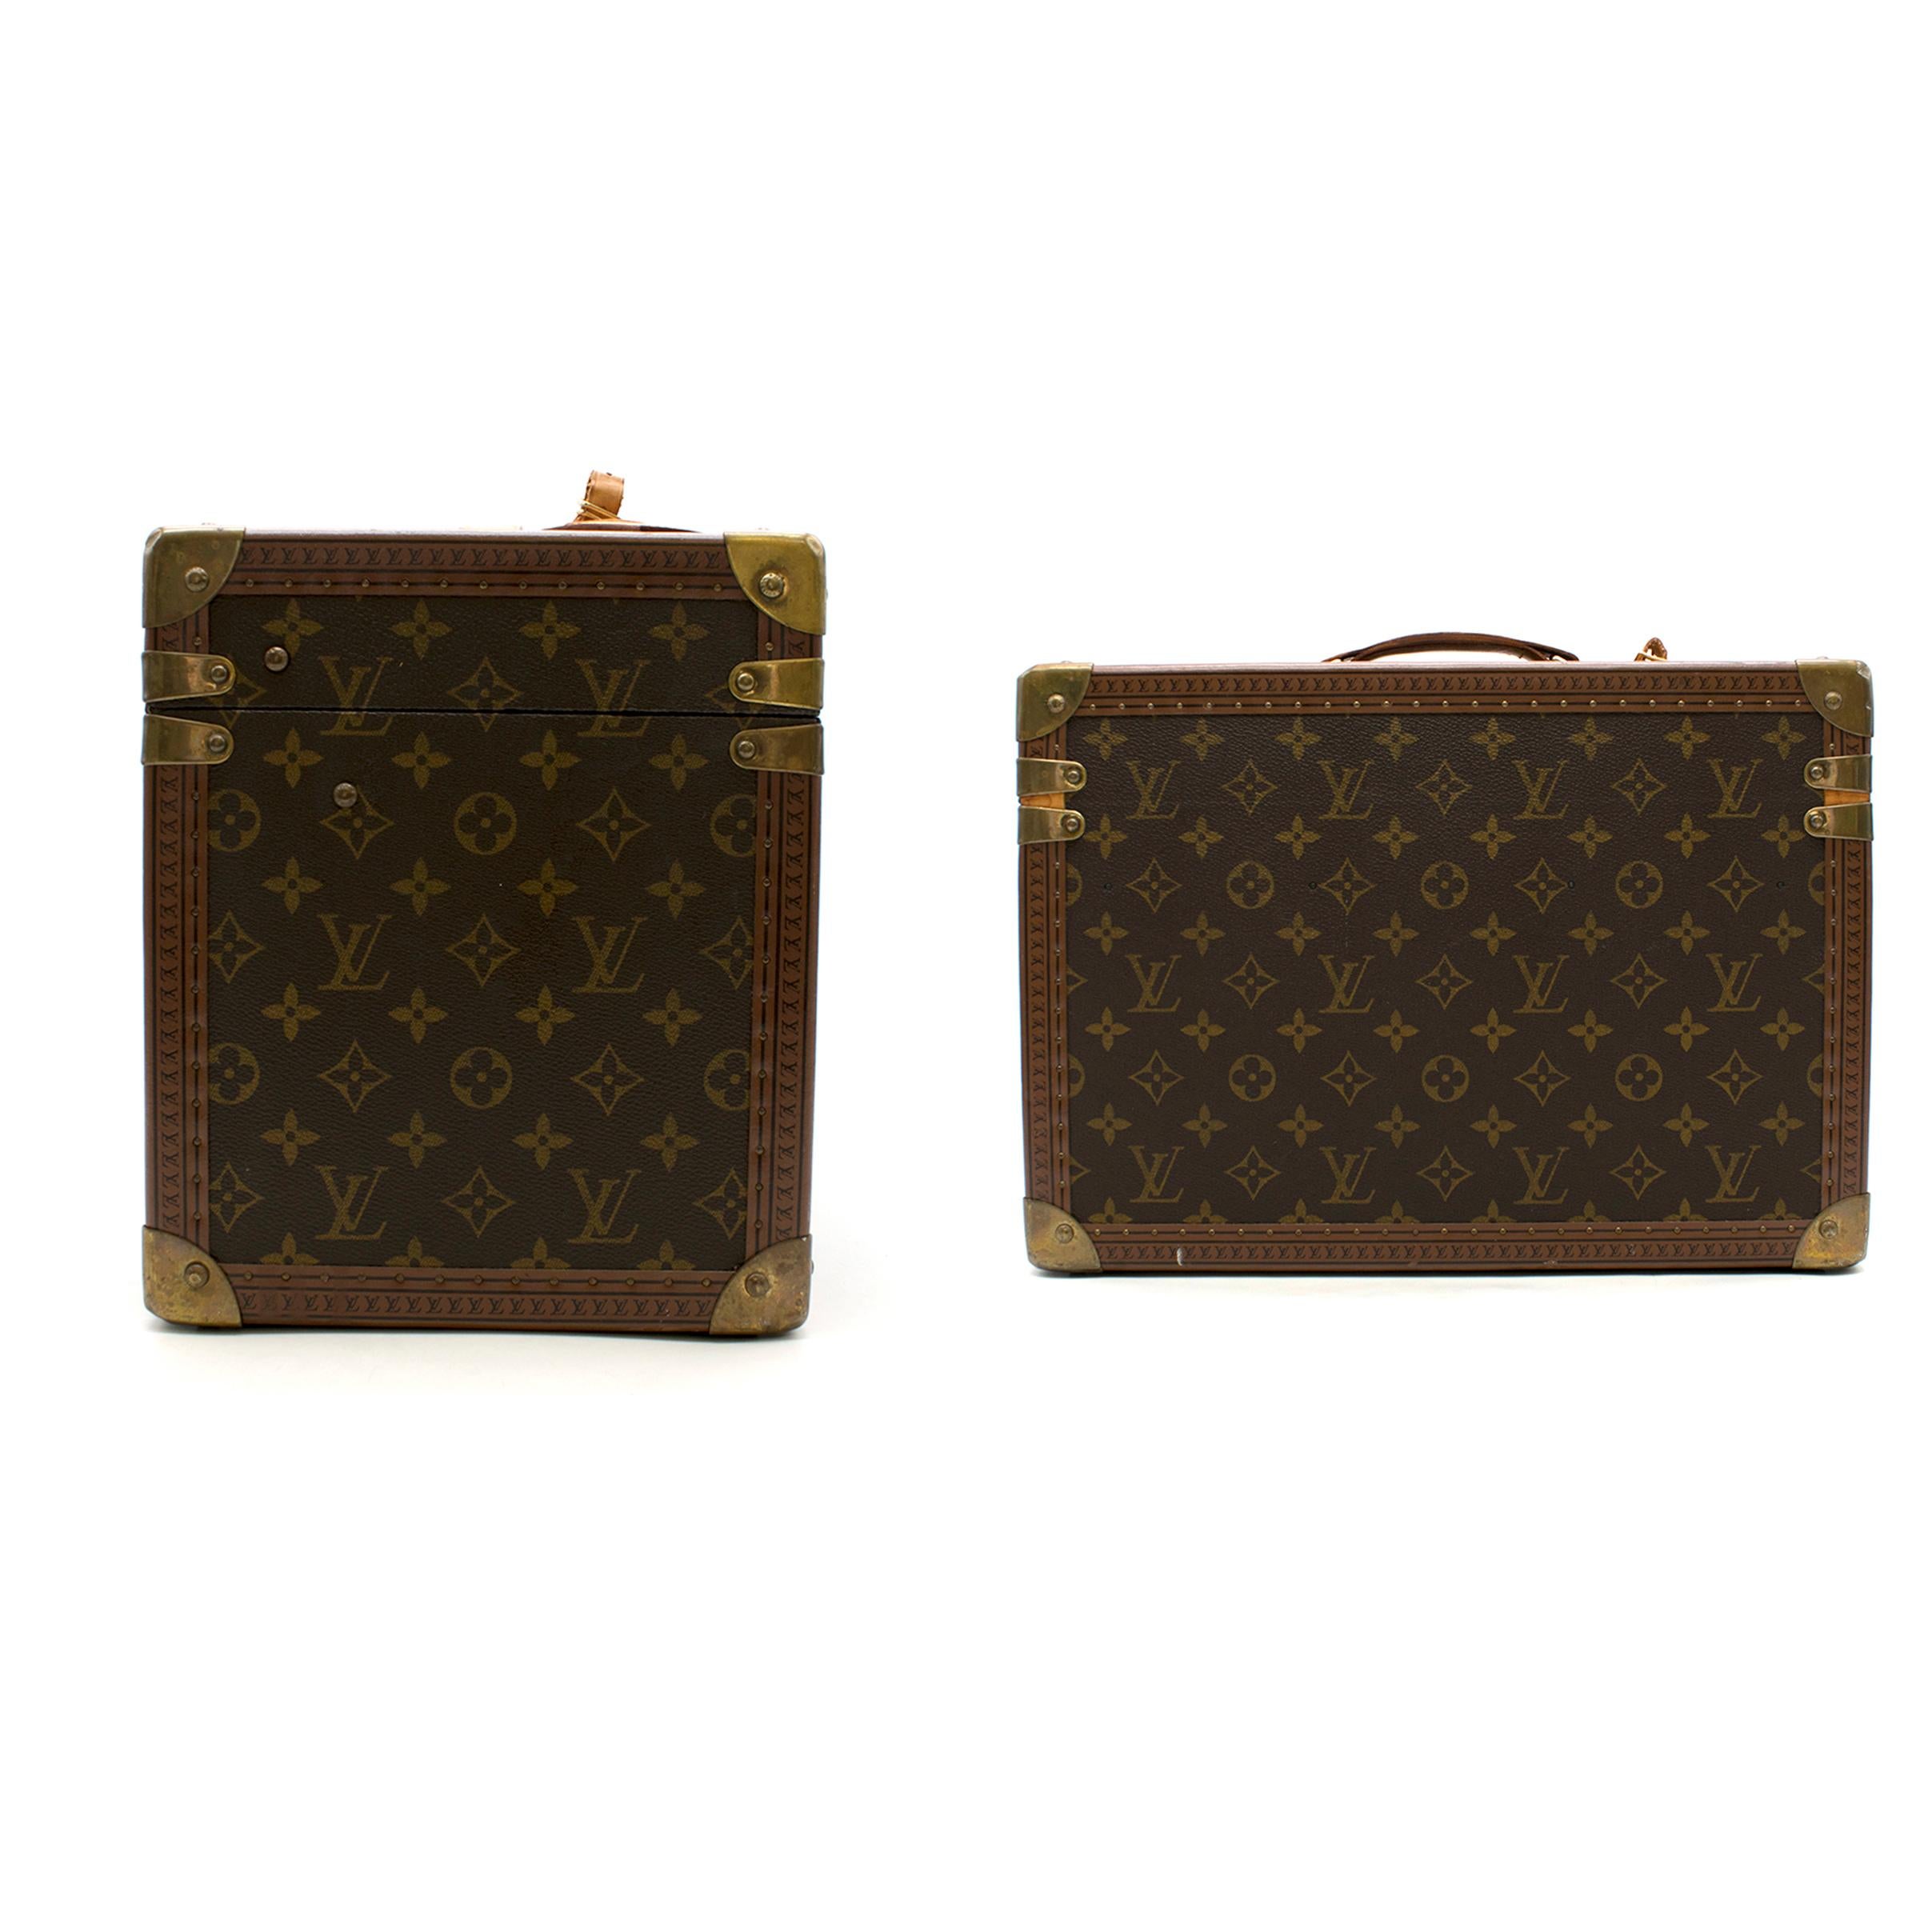 Louis Vuitton Monogram Canvas Beauty Trunk

-Monogram canvas beauty trunk
-Brass hardware
-One leather top handle with luggage tag
-Beige leather lining
-Push clasp closure with key lock fastening
-Two main interior parts with leather straps for